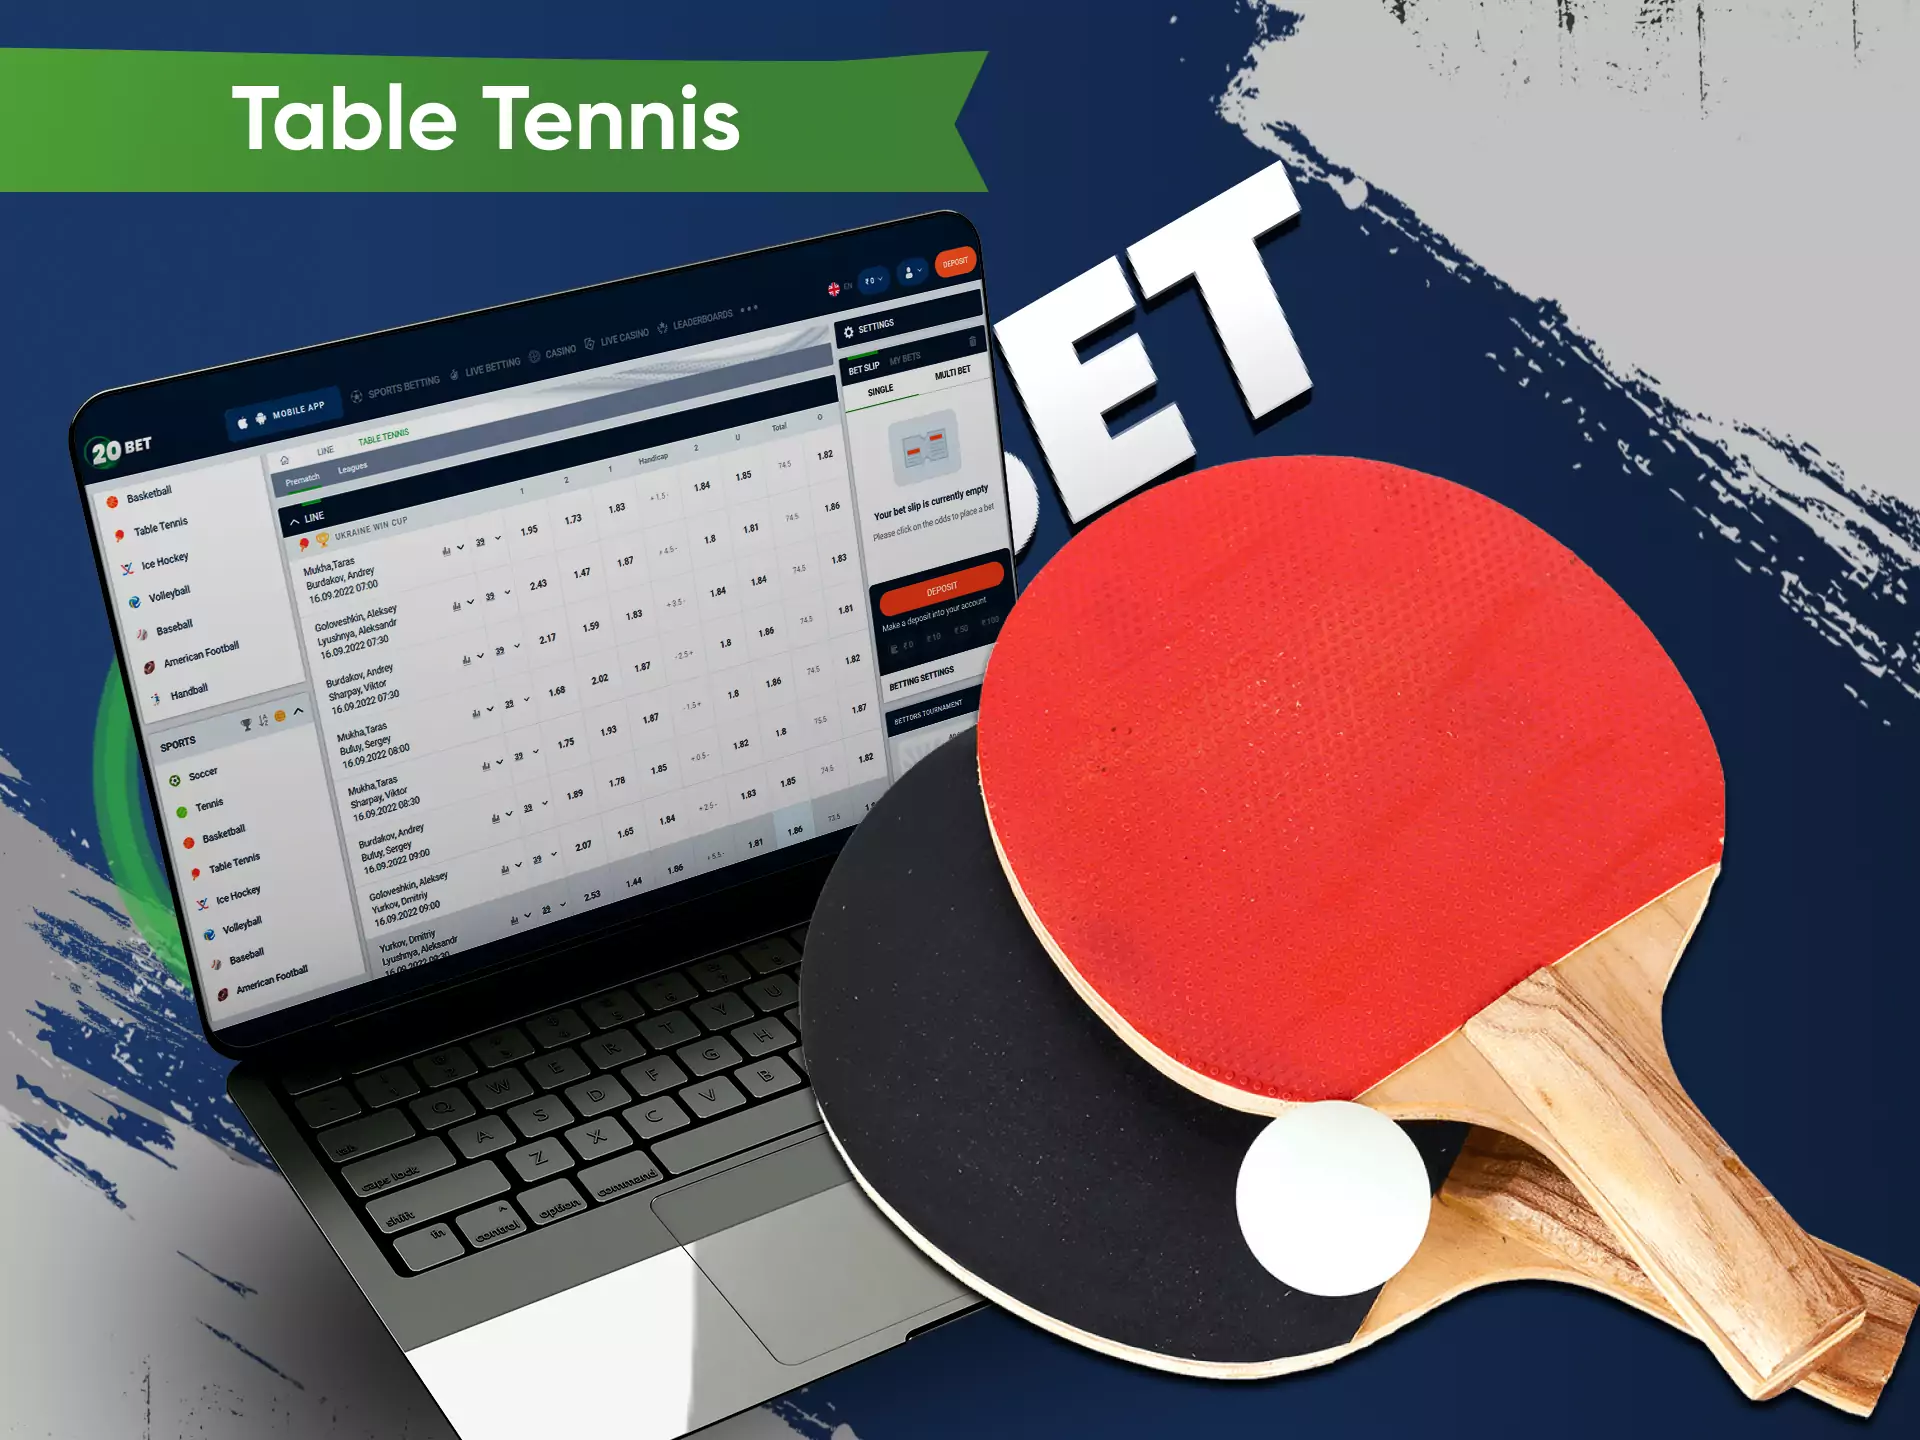 In the 20bet sportsbook, you can bet on table tennis tournaments.